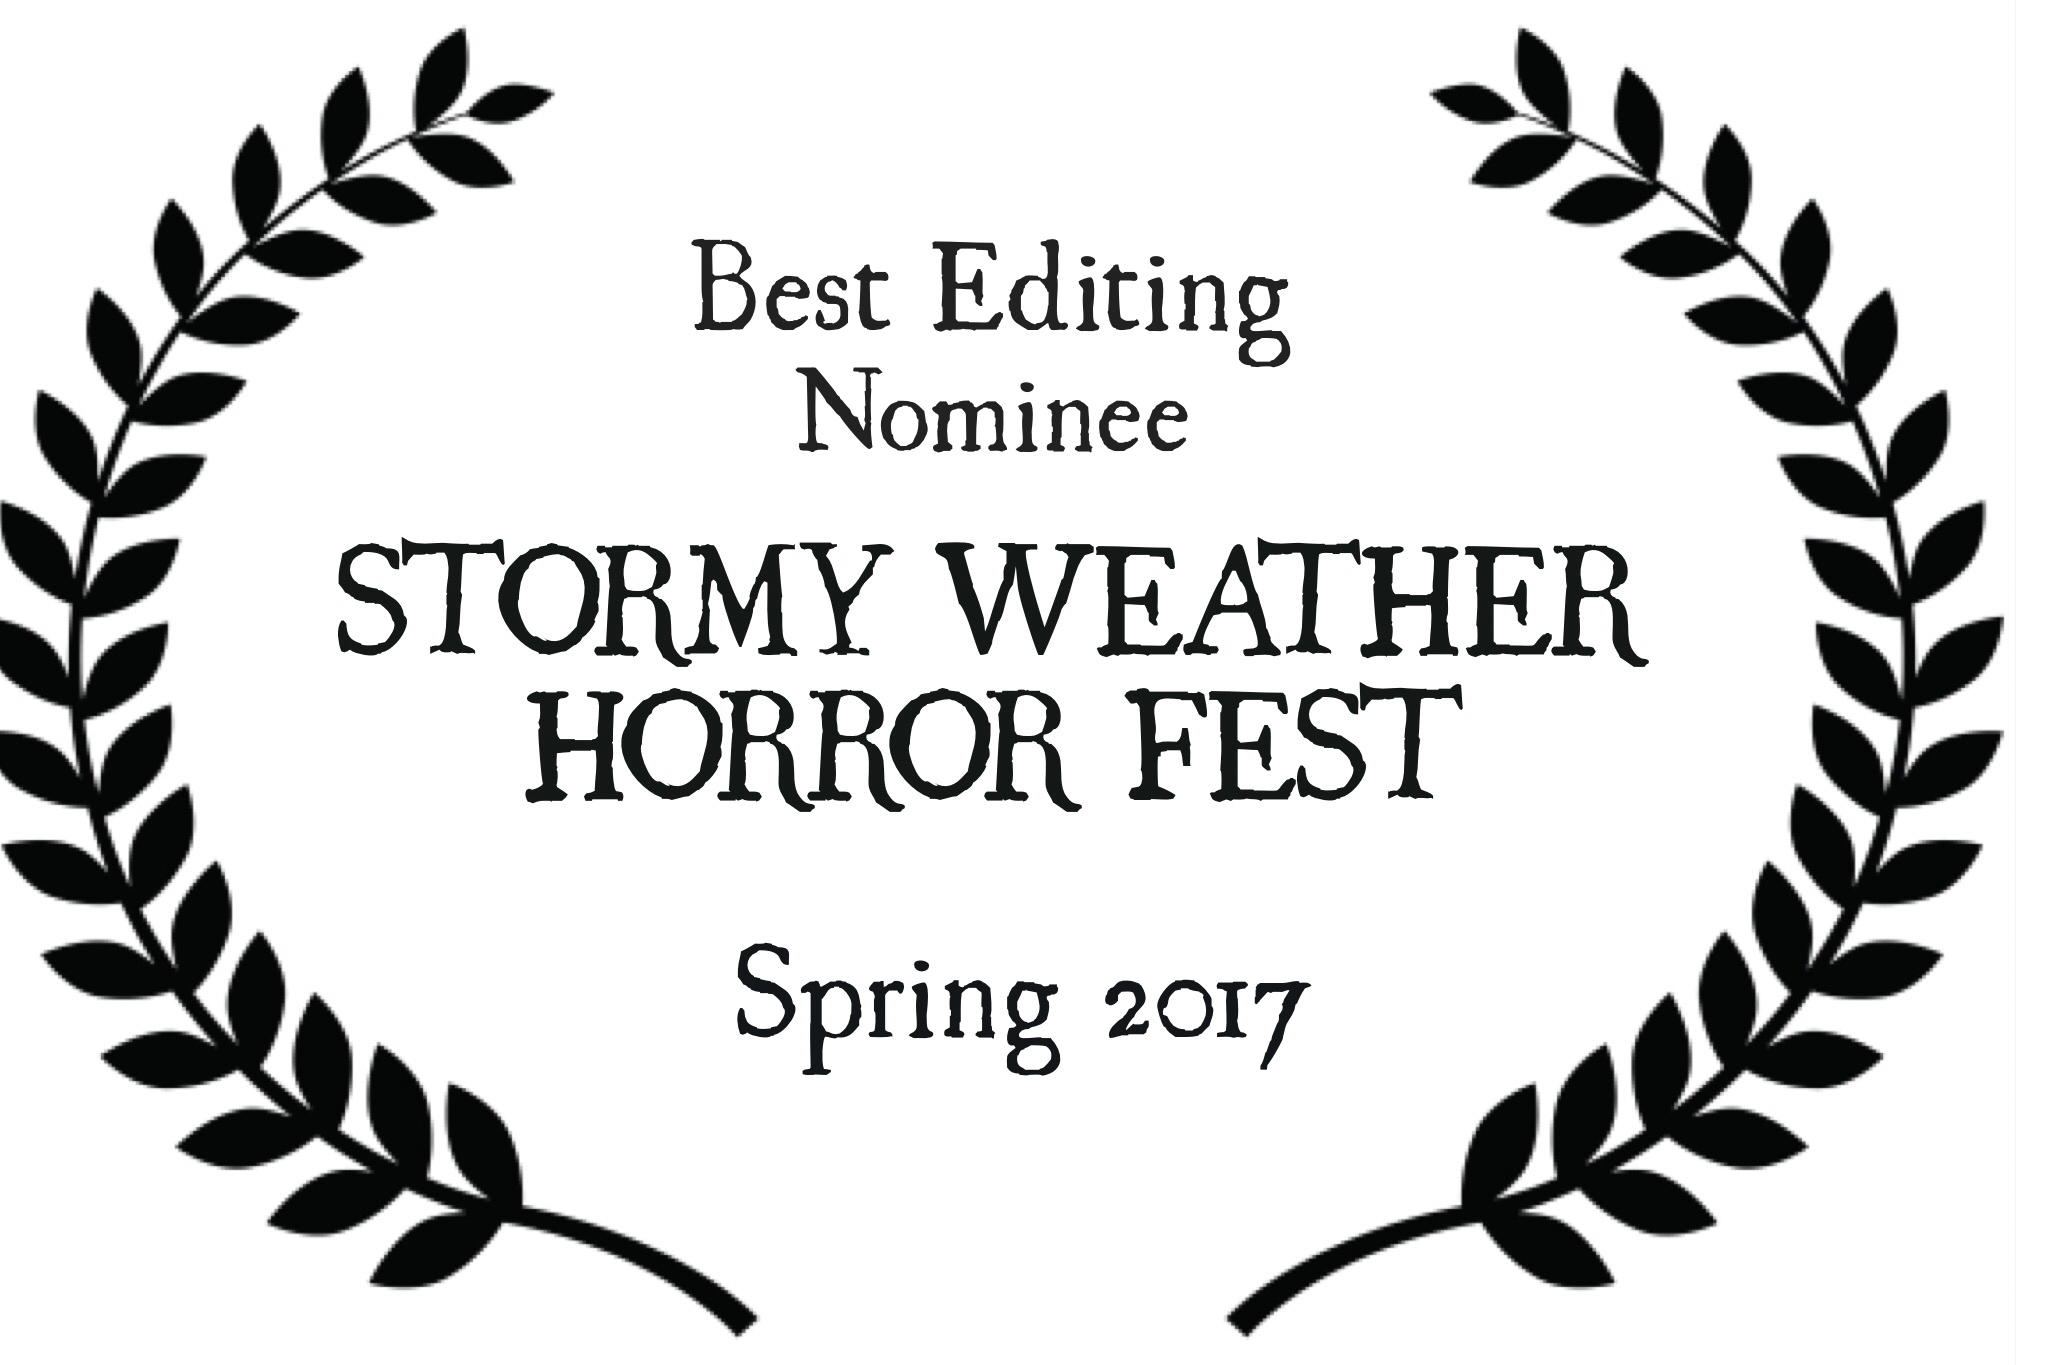 stormy weather horror fest 2017 spring best editing nominee the honey jar.PNG